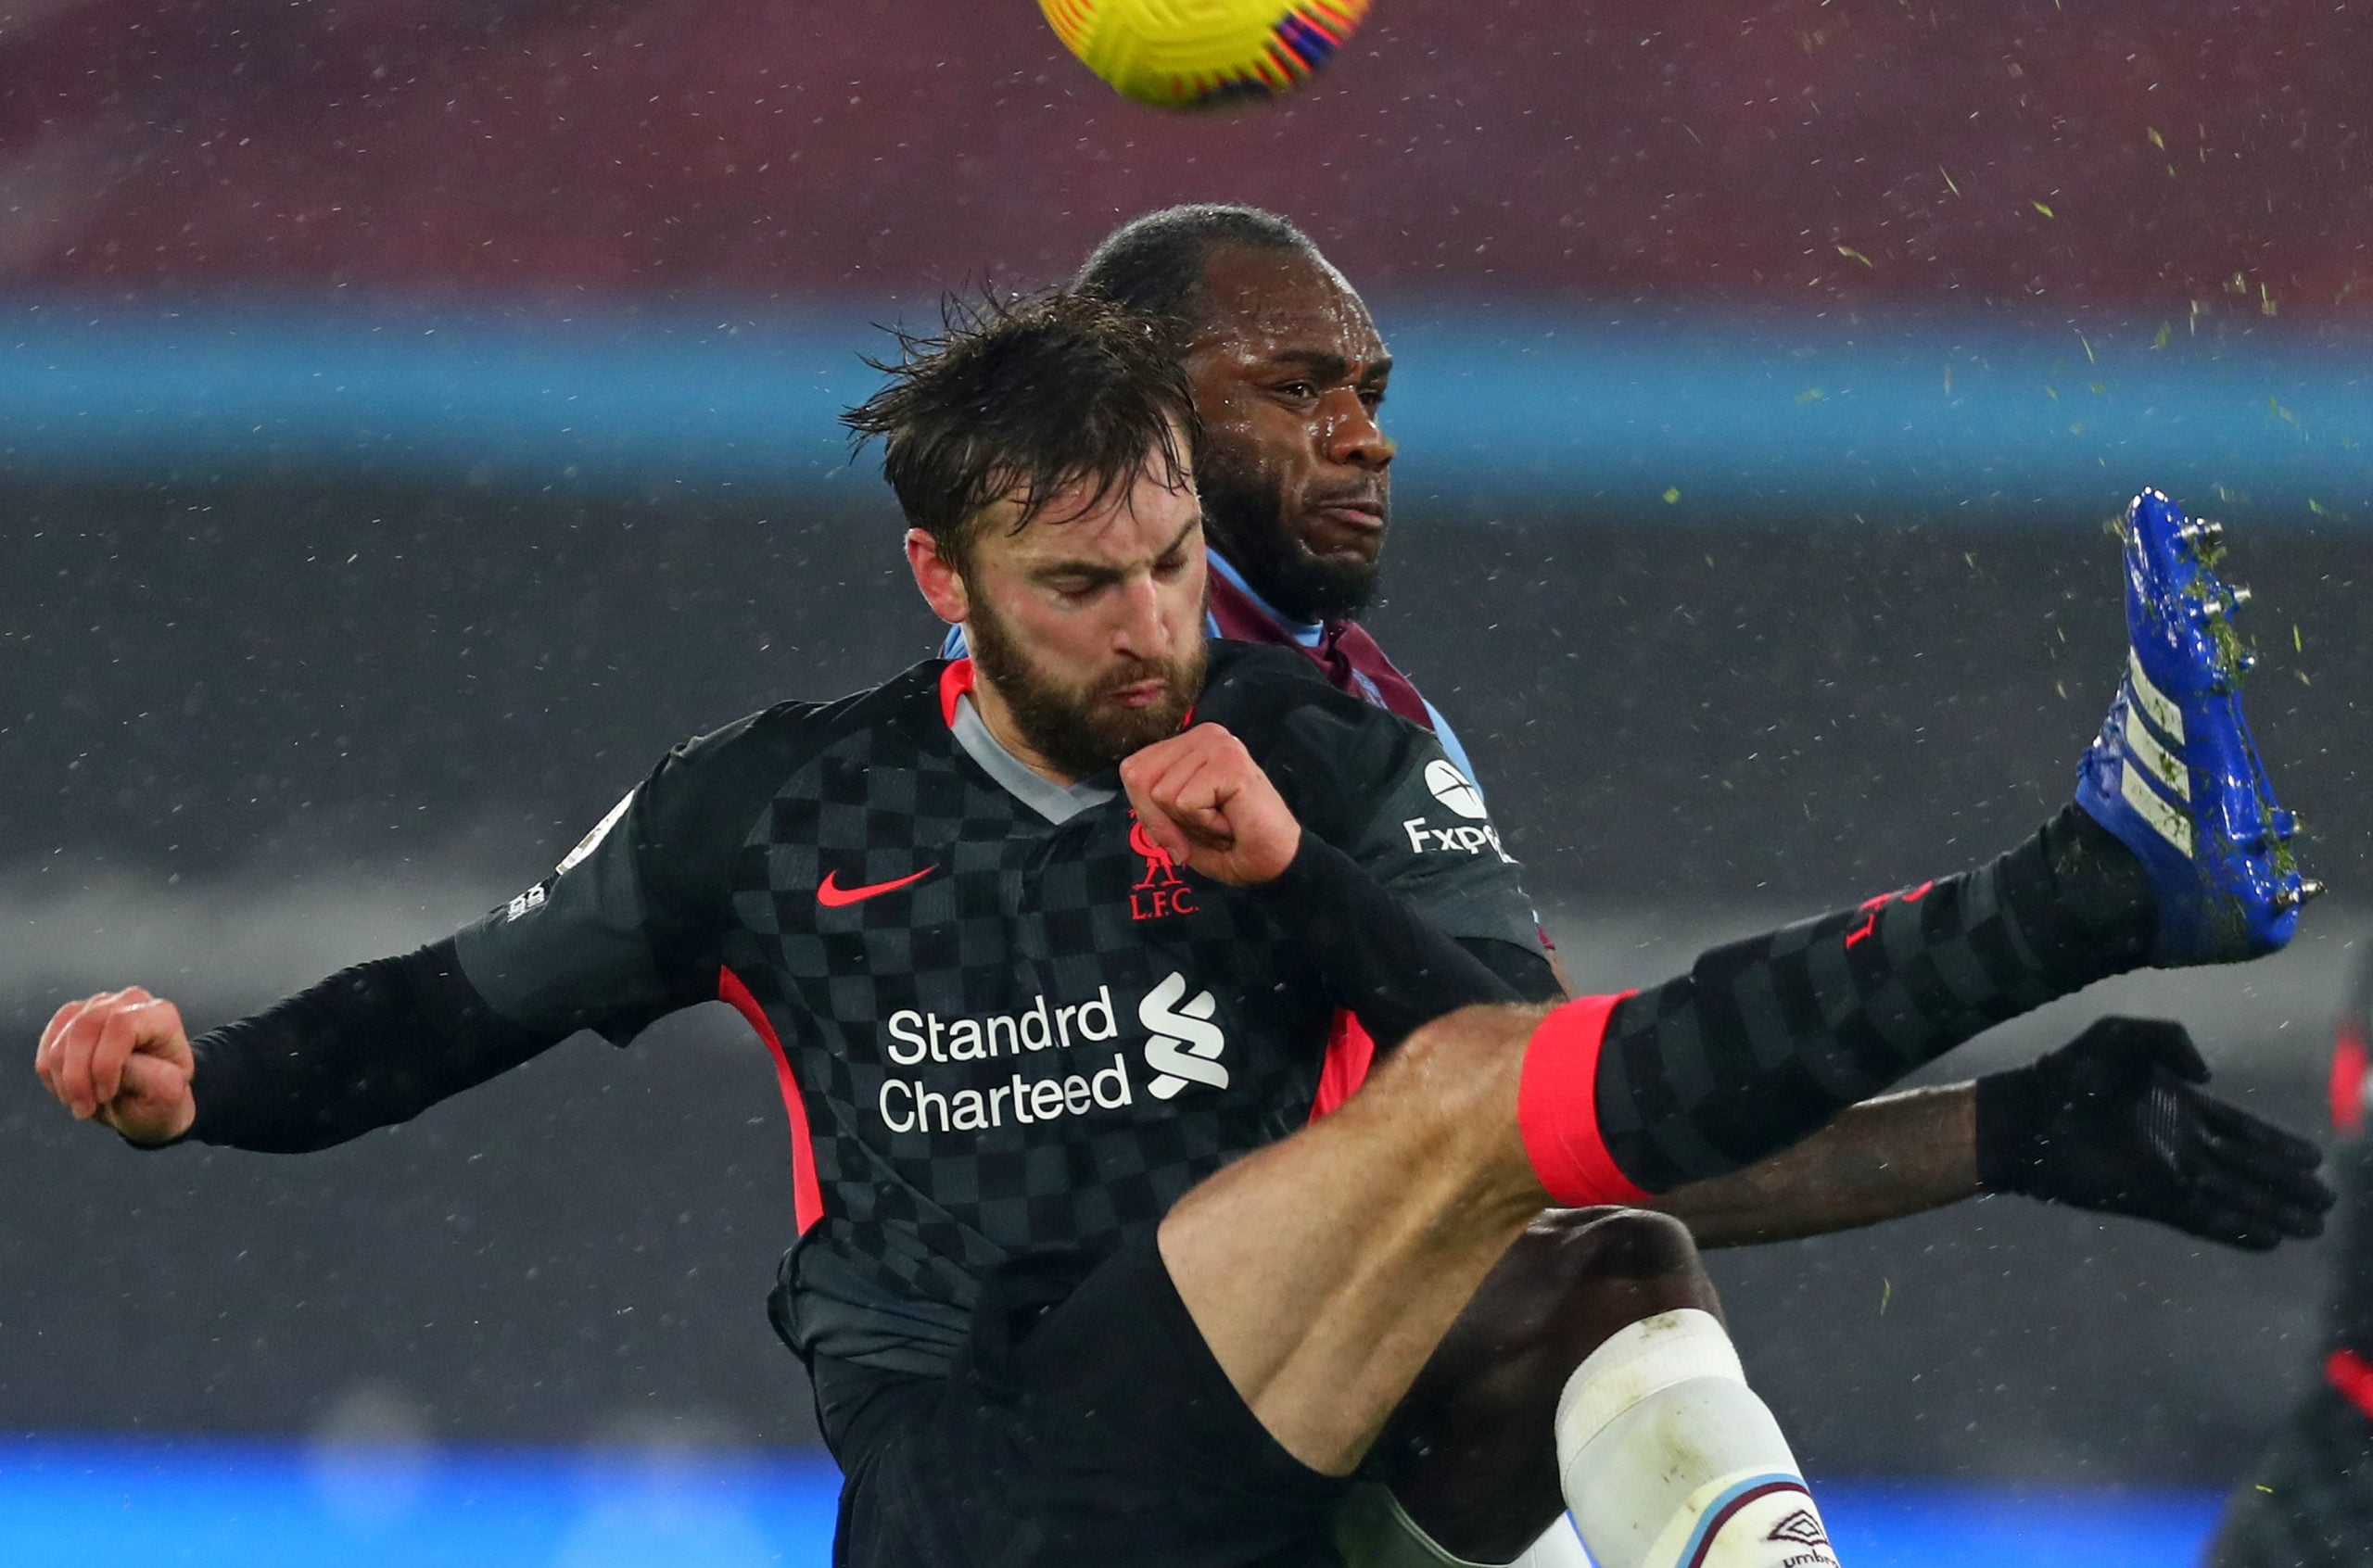 West Ham United Players Rated In Loss Vs Liverpool (Michail Antonio can be seen in the picture)